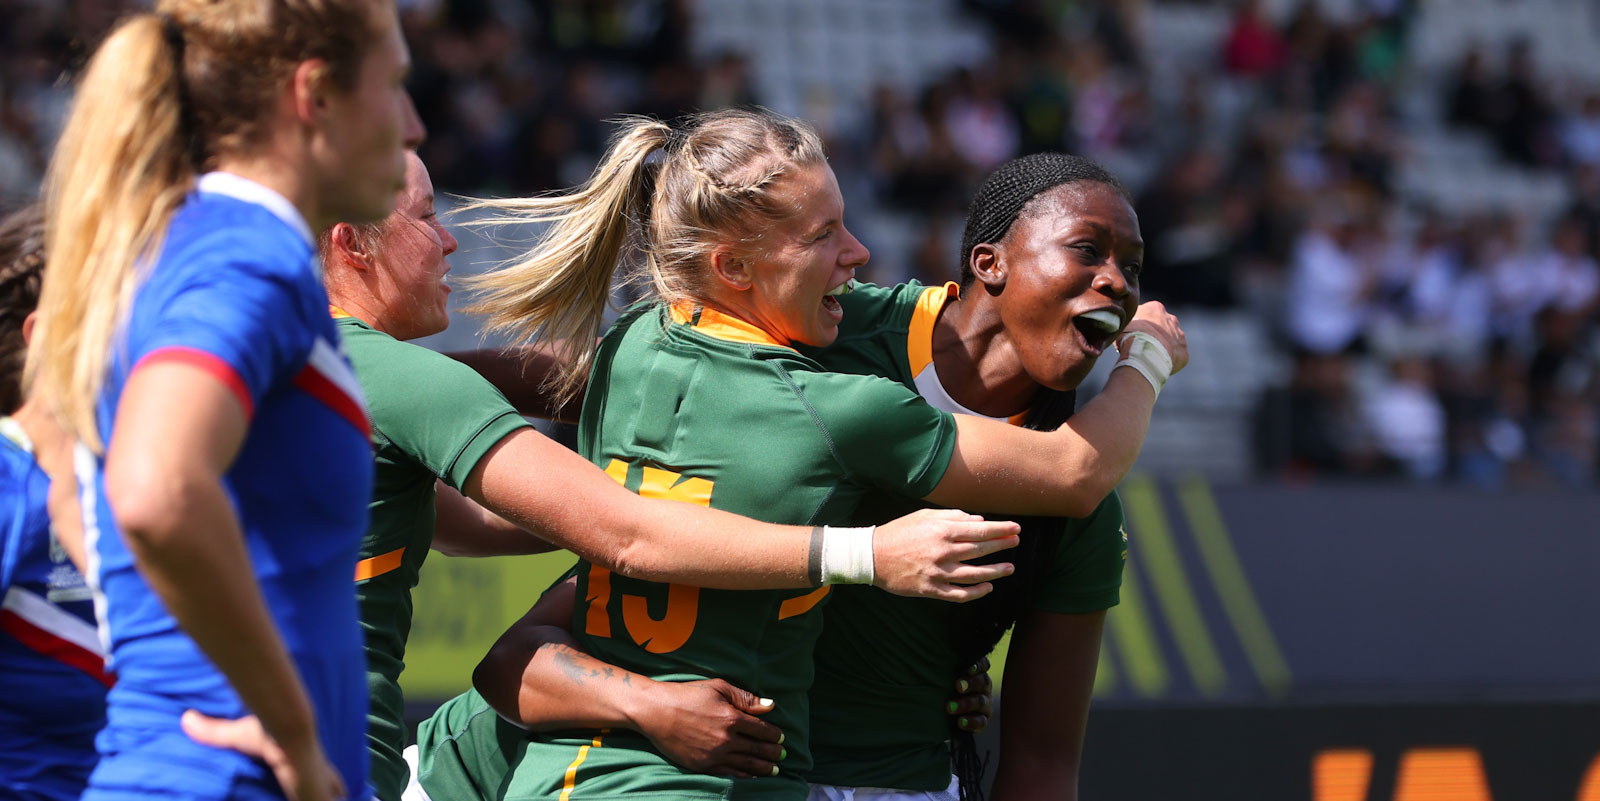 Nomawethu Mabenge scored their first try at the RWC in New Zealand, much to the delight of Tayla Kinsey and Nadine Roos.